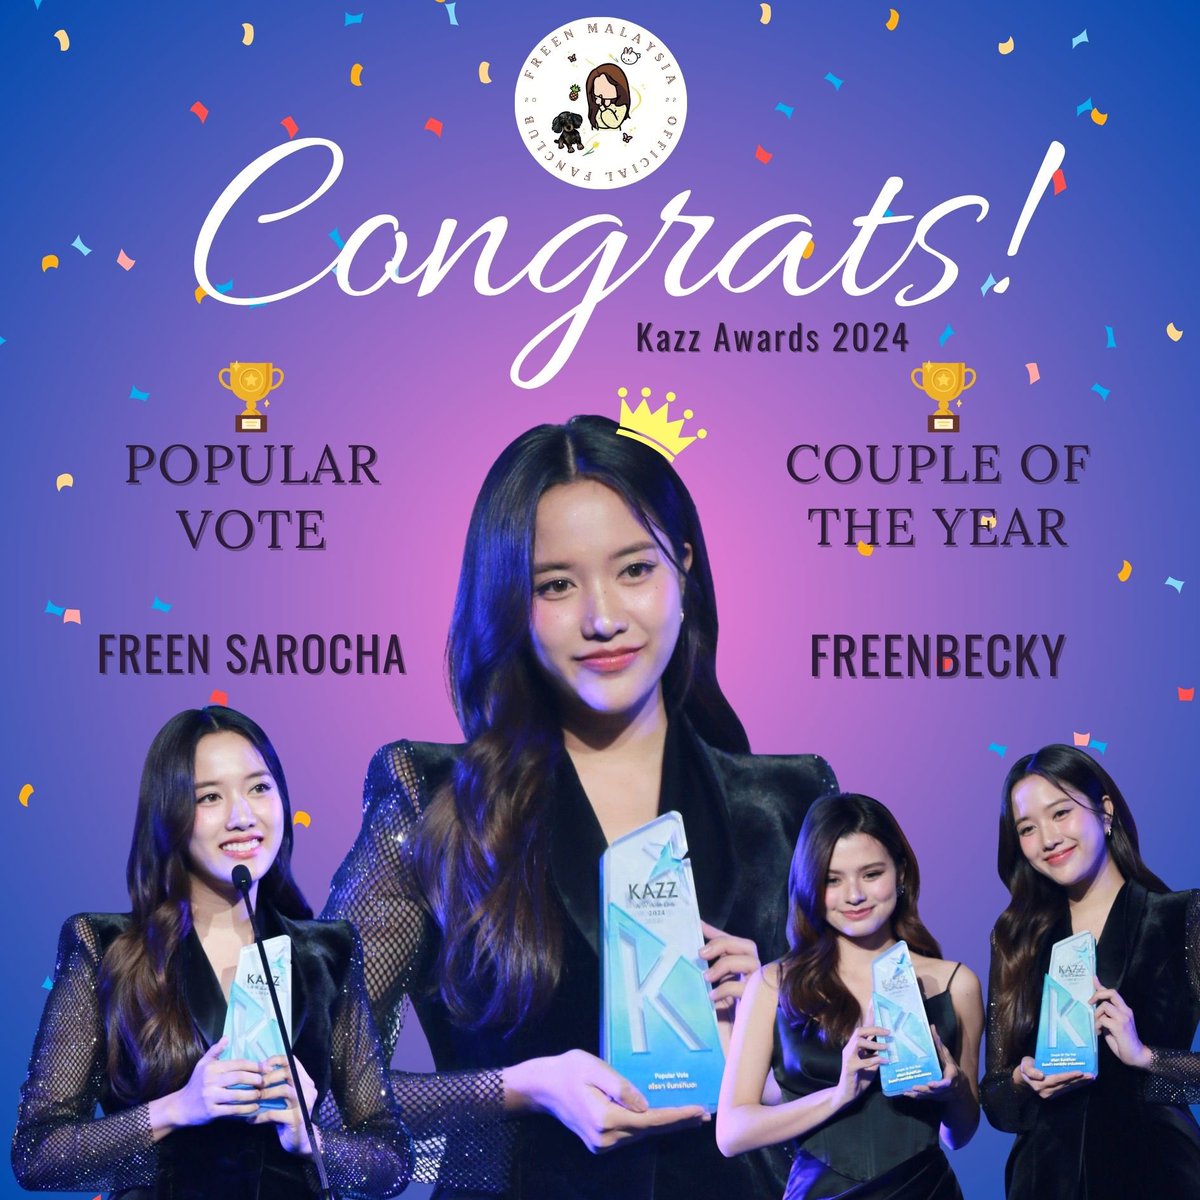 Congratulations to our star🎉💖🤩 Winning Popular Vote & Couple of the Year with Becky🥰✨ SAROCHA REBECCA IN KAZZ #KazzAwards2024xFreenBecky #srchafreen